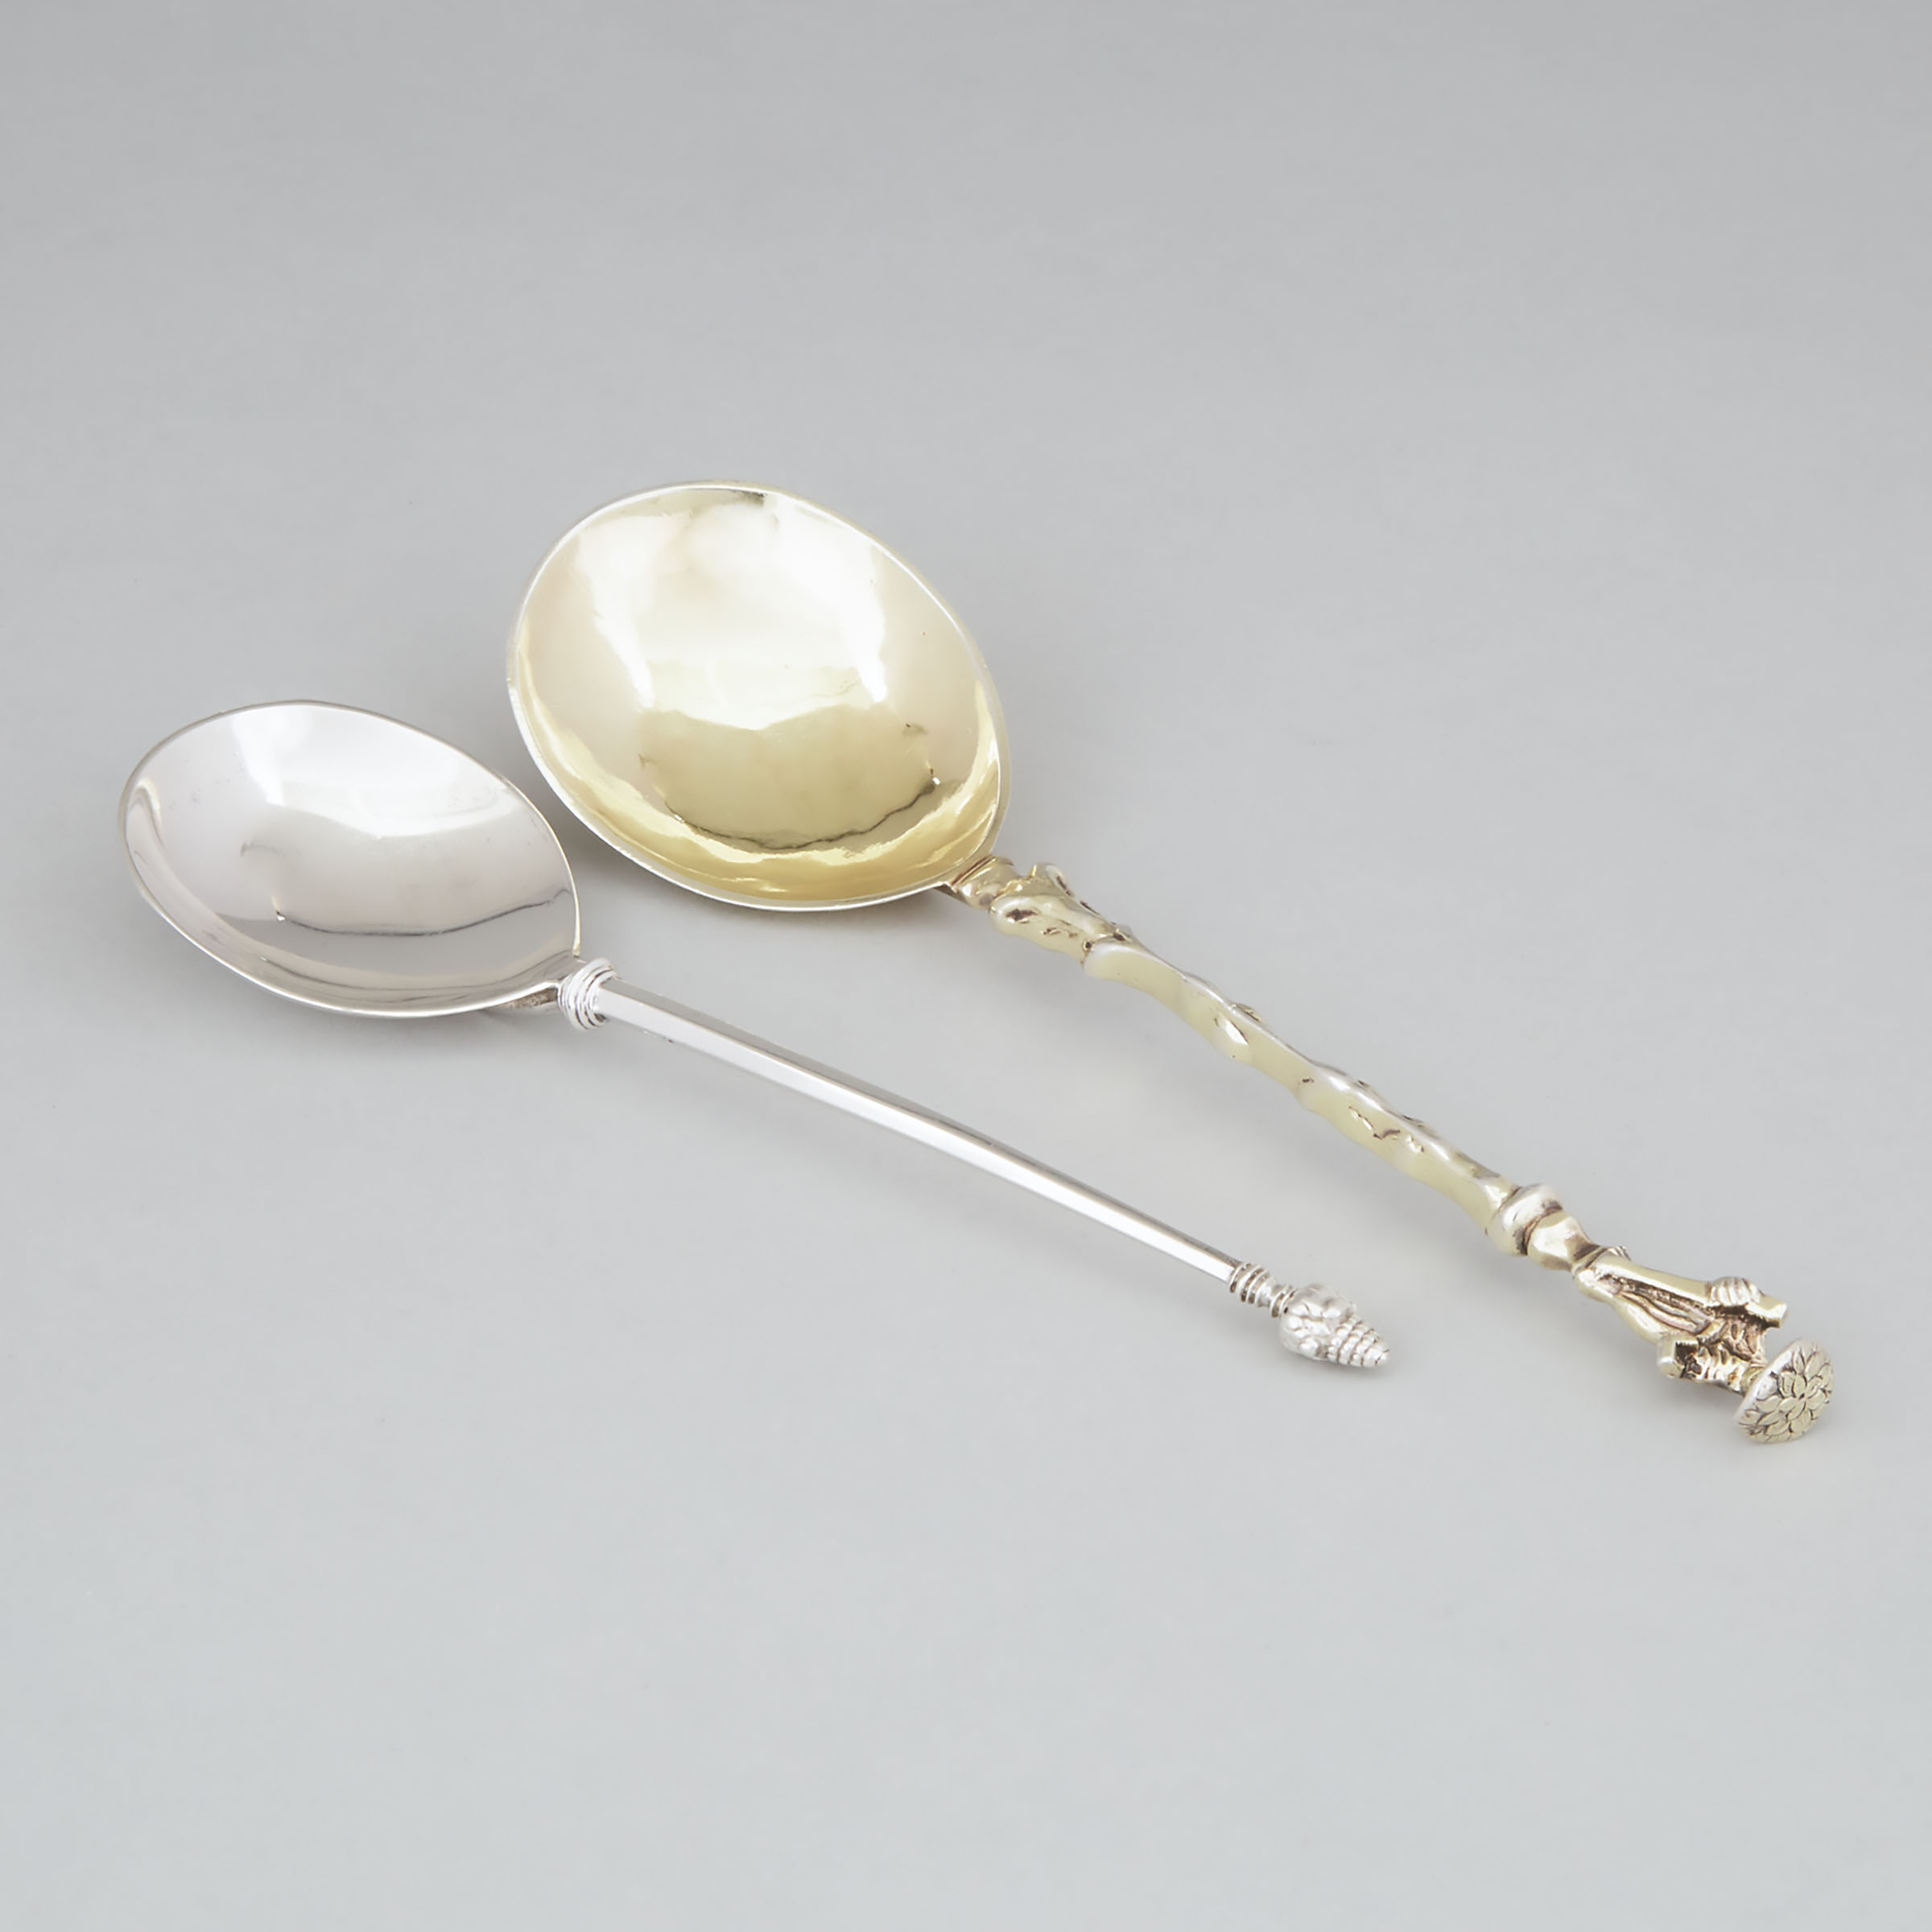 Continental Silver-Gilt Apostle Spoon and Another Spoon with Bud Finial, 19th century